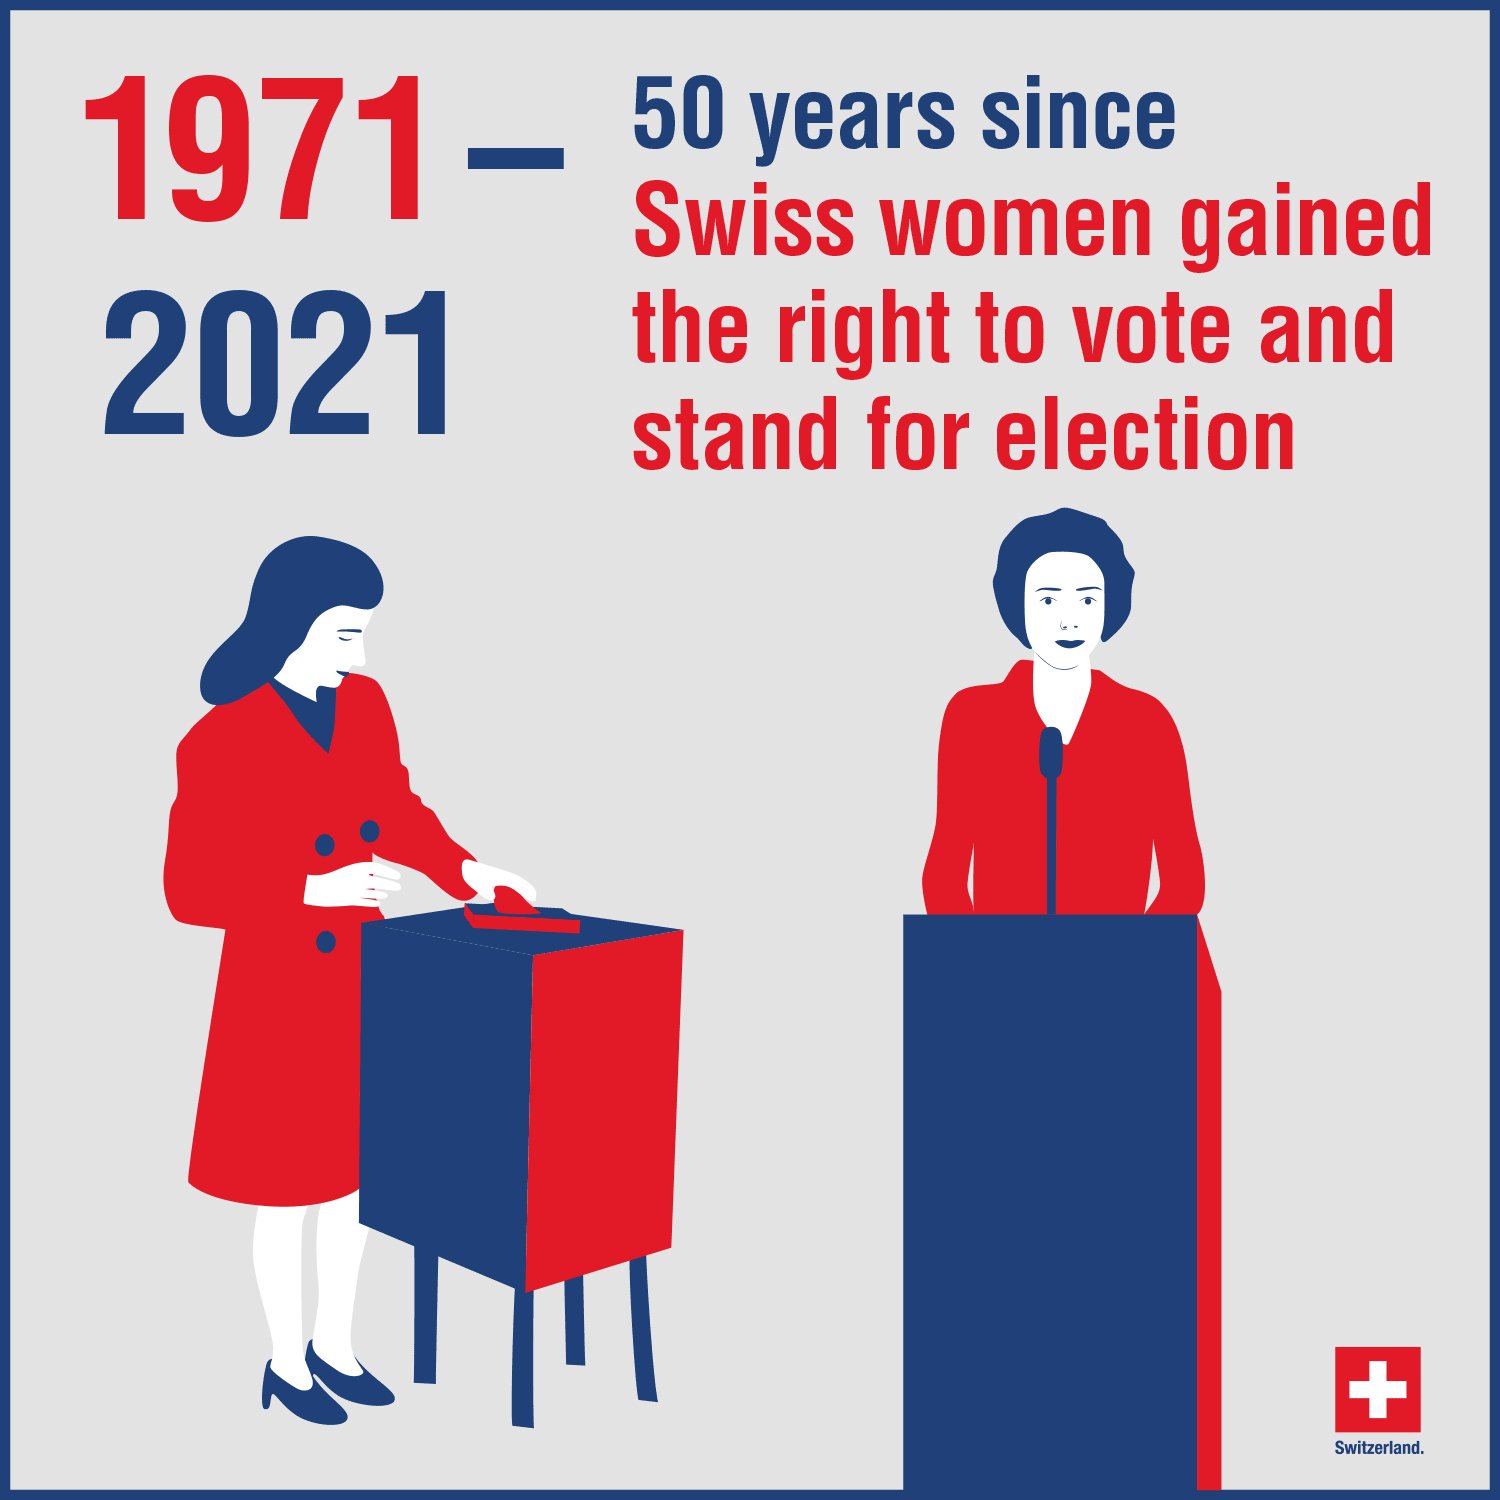 Swiss MFA on Twitter: "50 years ago #WomenofSwitzerland gained the right to vote 🗳 Since then 🇨🇭 has made considerable progress, but there is still a great deal to be done 👉 #